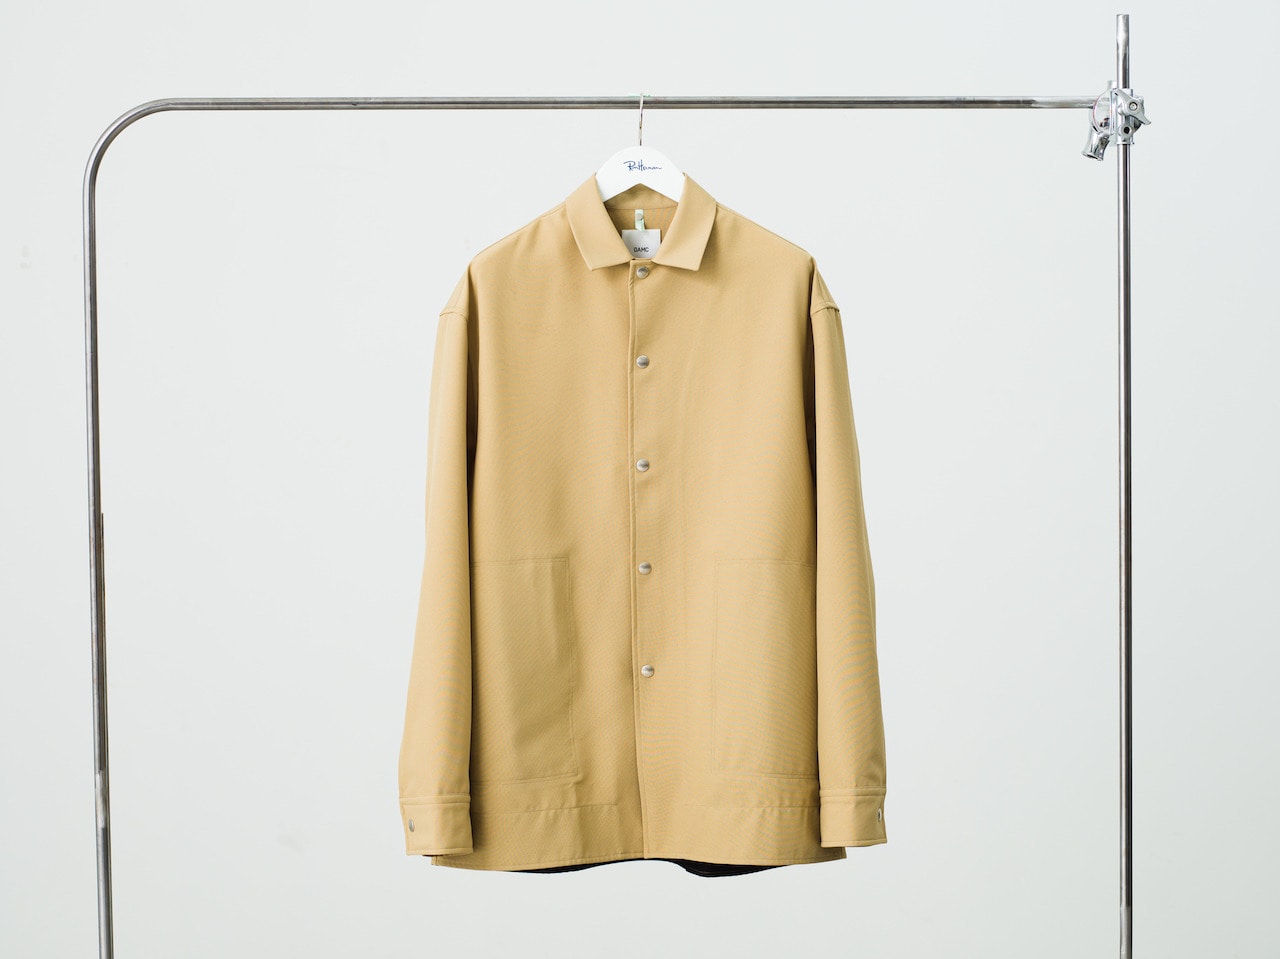 oamc 21aw 21ss jammer shirt23aw - ブルゾン